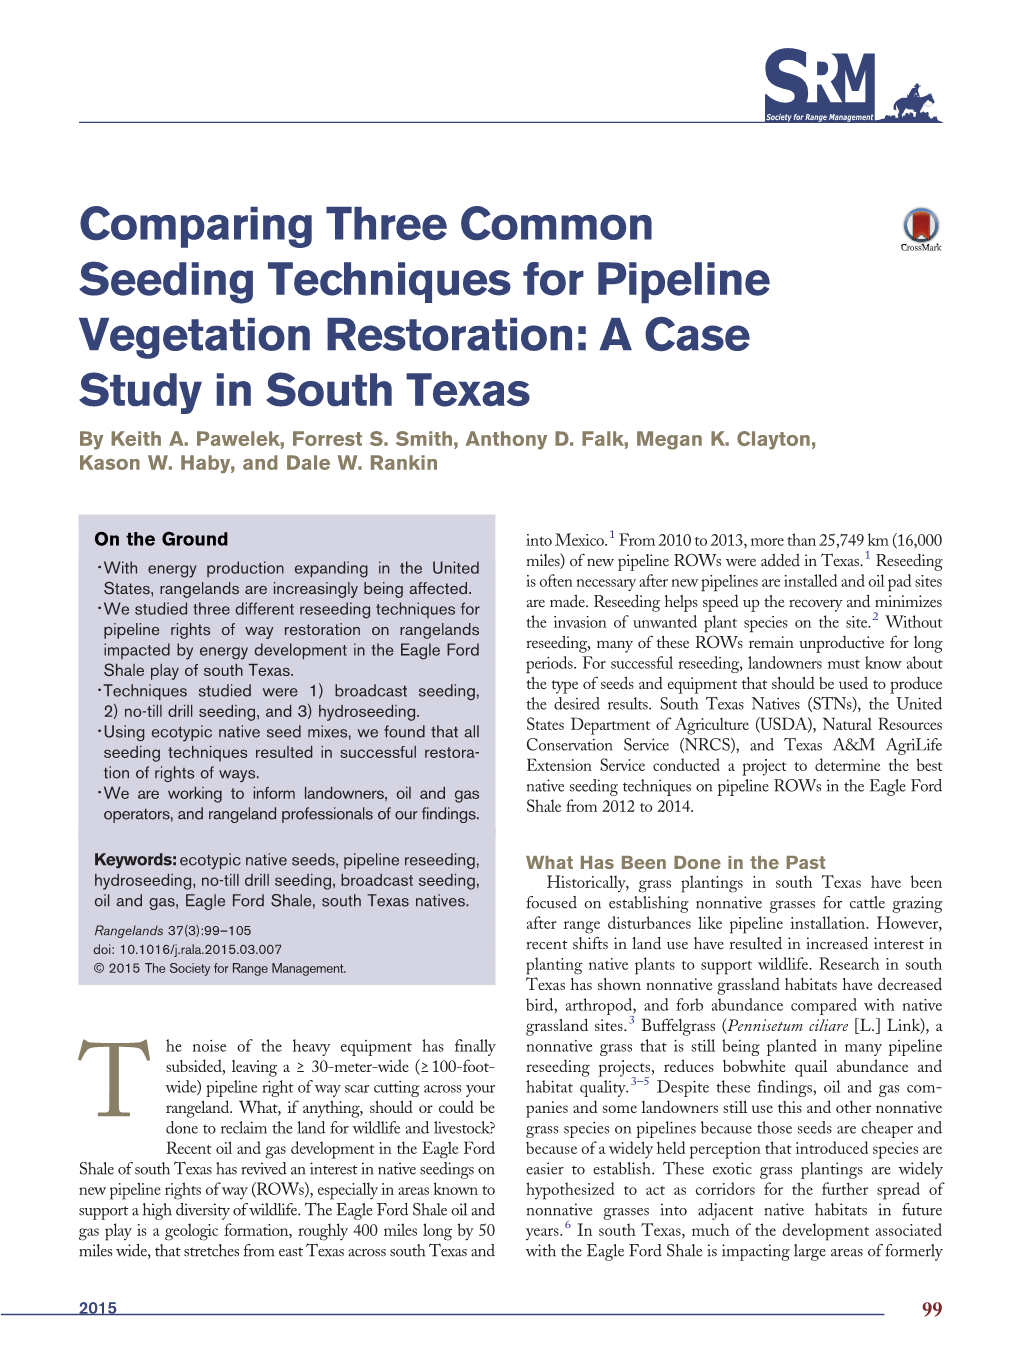 Comparing Three Common Seeding Techniques for Pipeline Vegetation Restoration: a Case Study in South Texas by Keith A